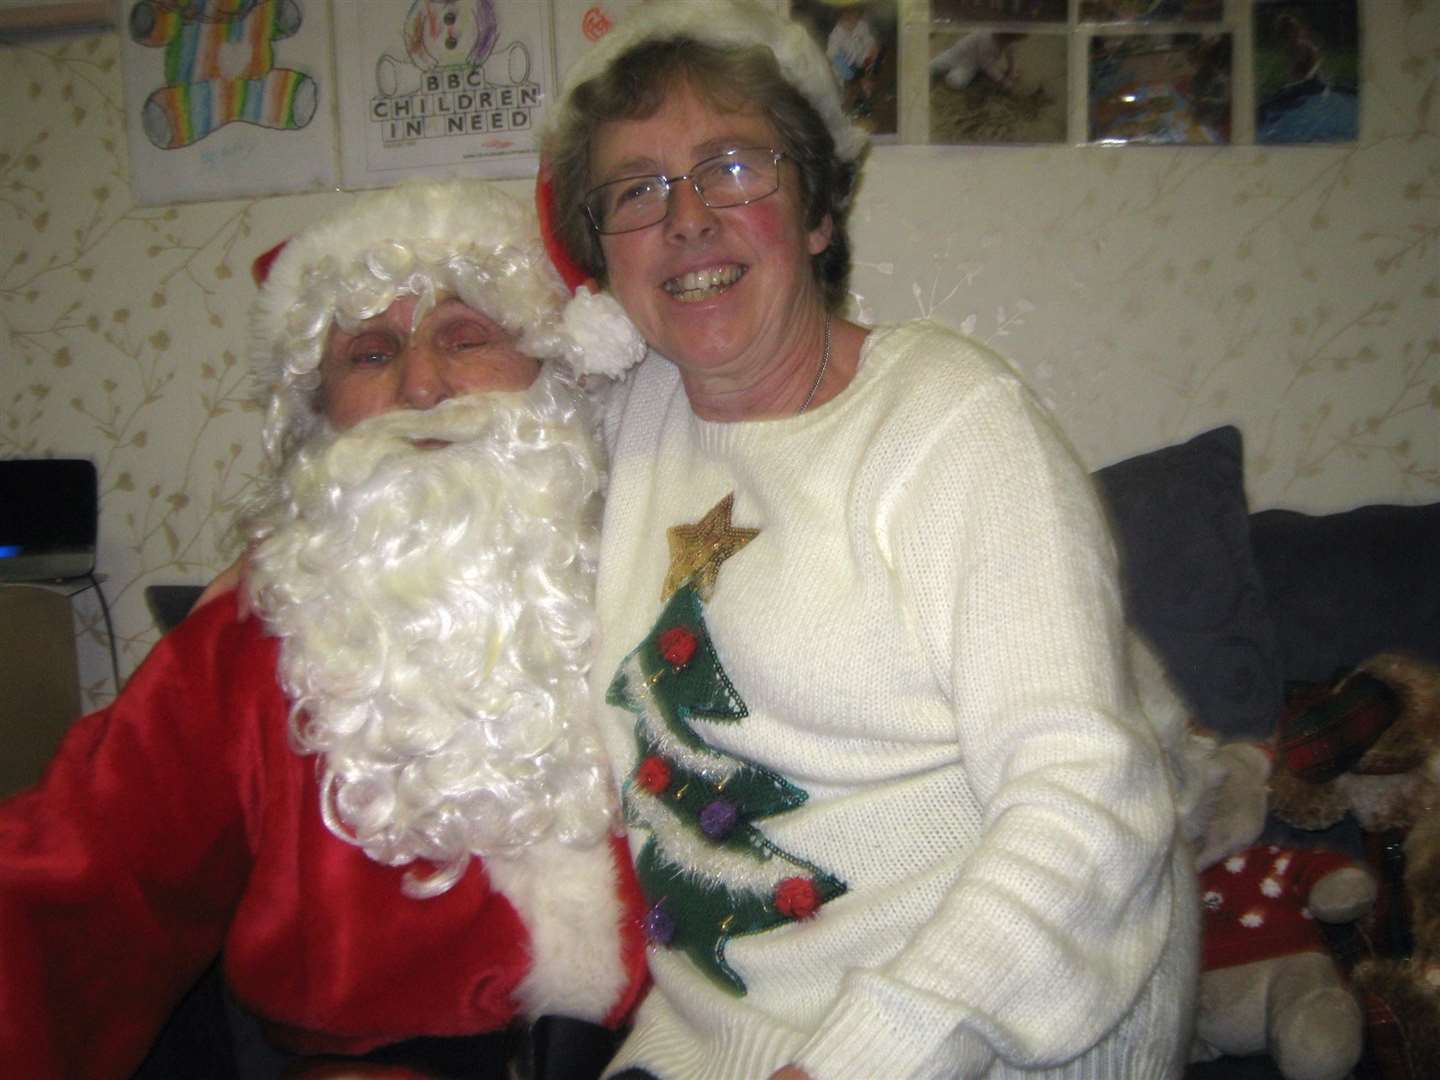 Tom enjoyed delighting youngsters by dressing up as Father Christmas. Picture: Yvonne Wills